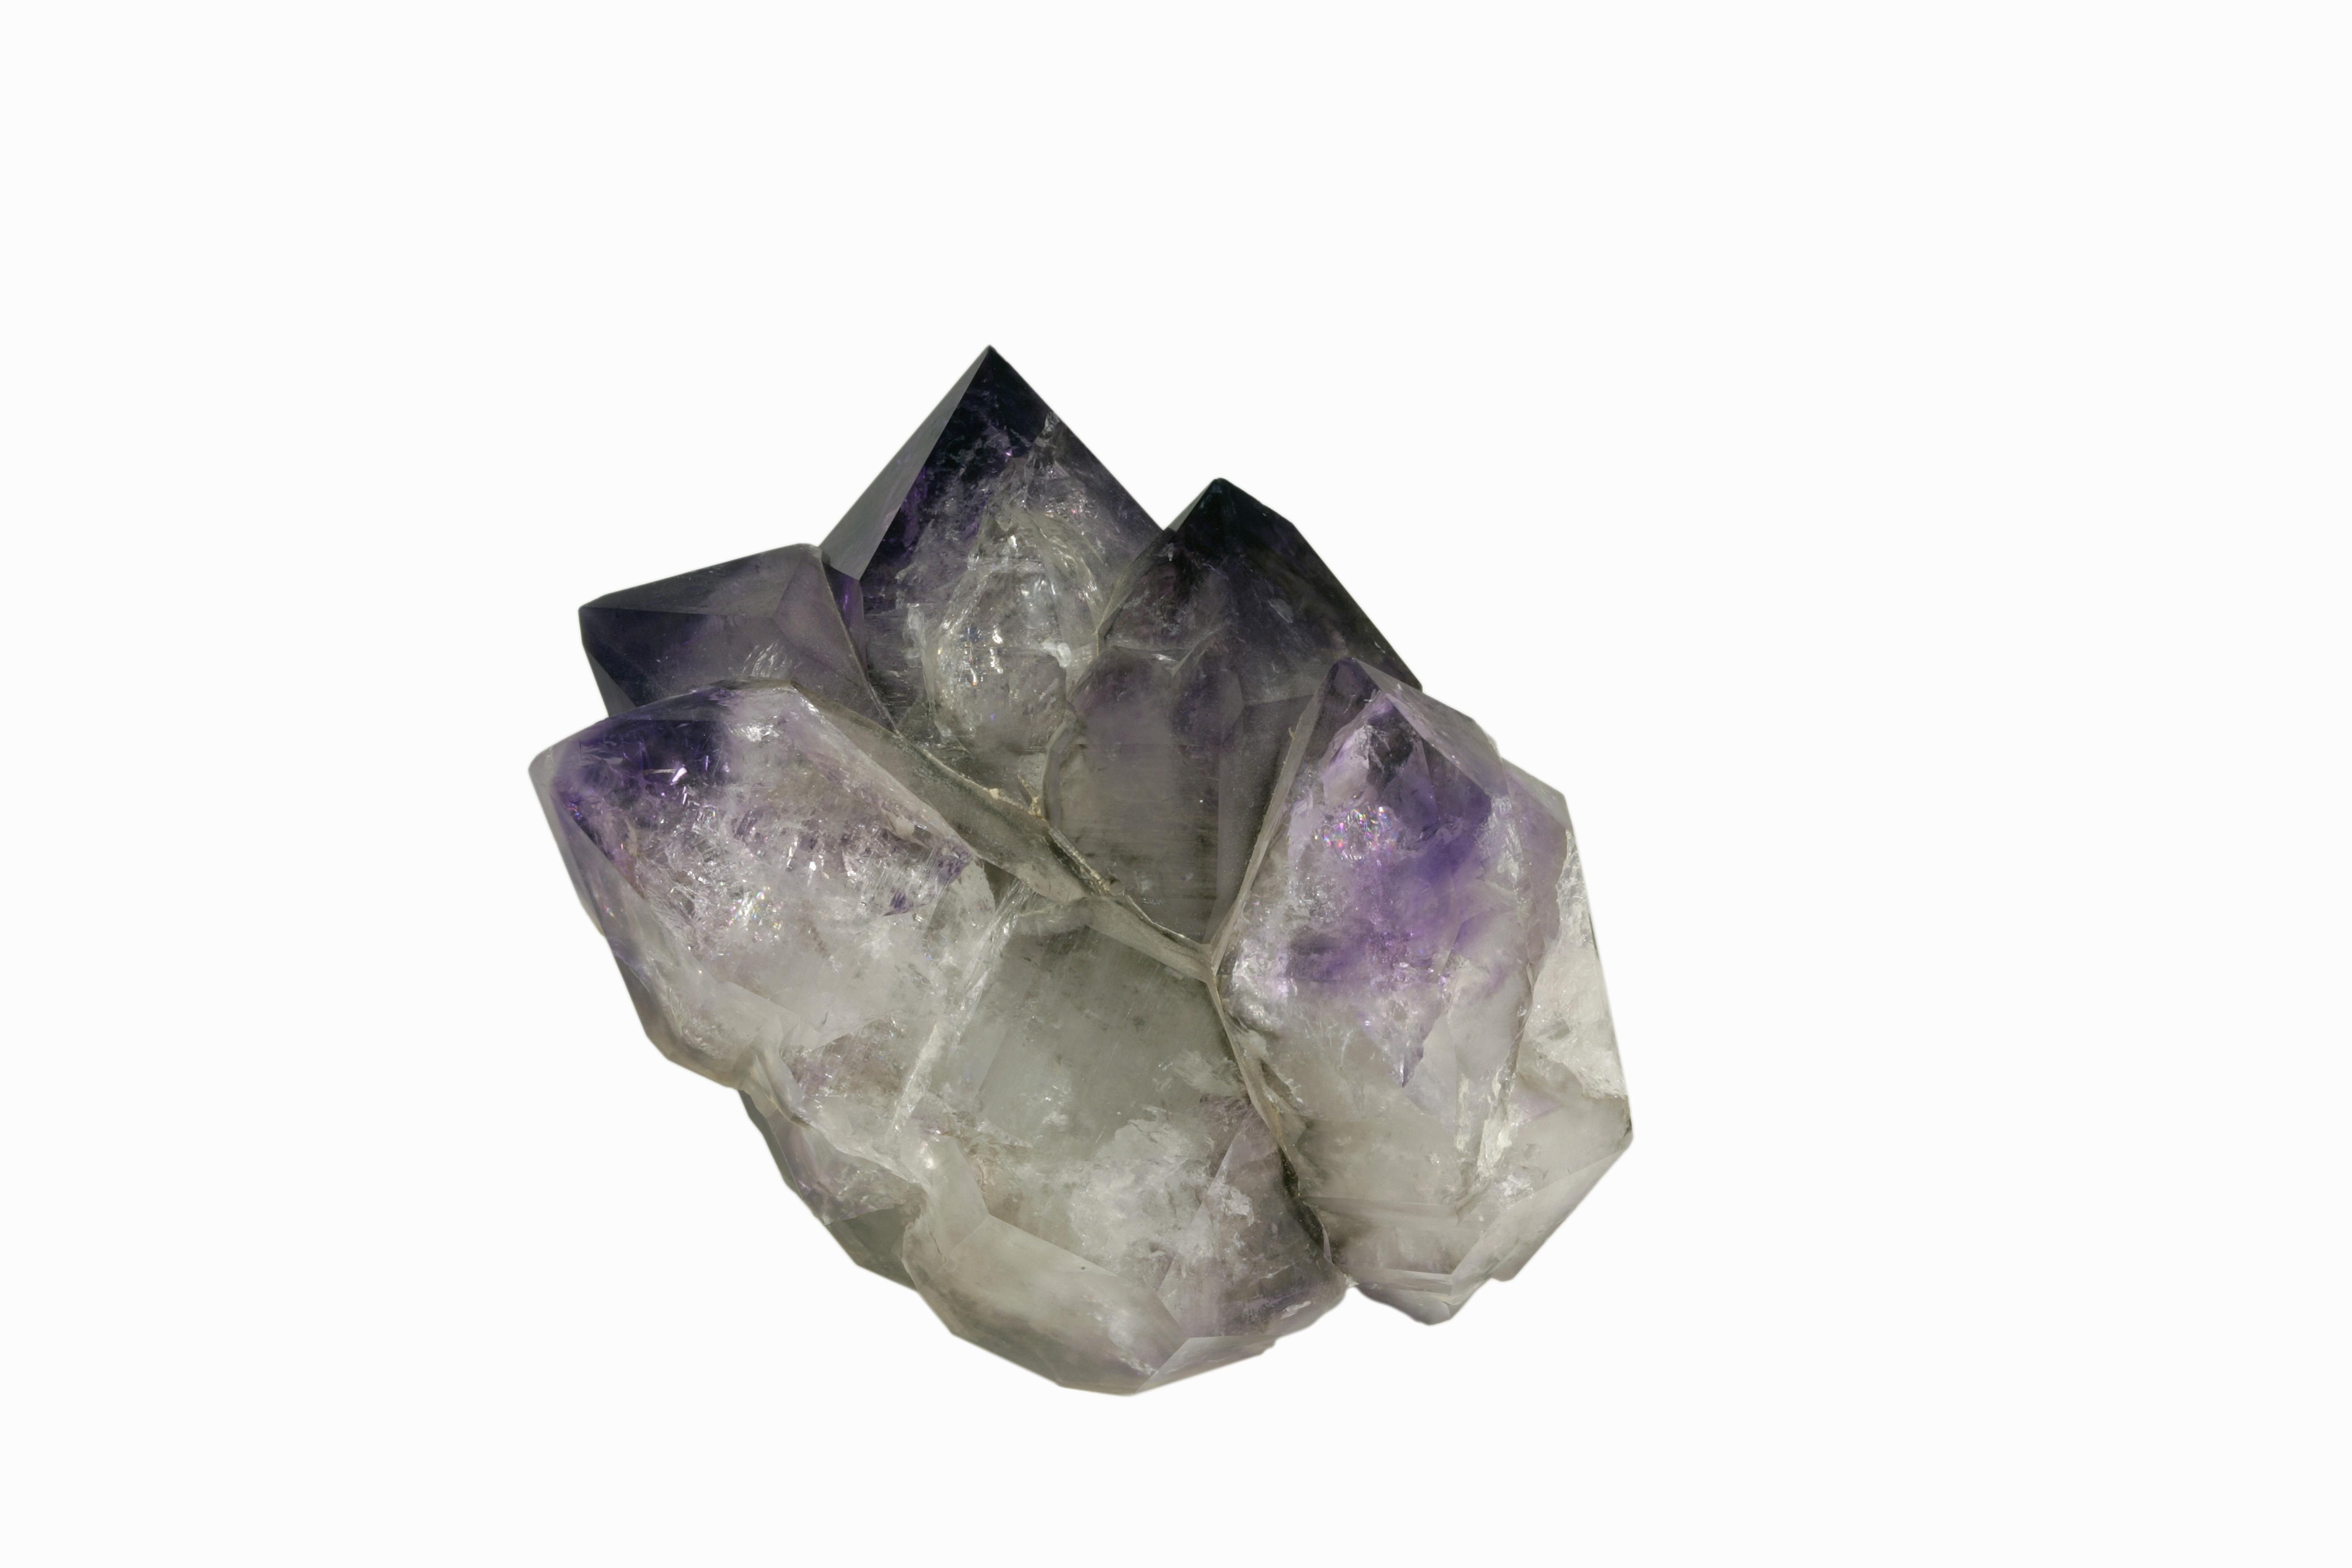 13 Stylish Ruby Cut Glass Vase 2024 free download ruby cut glass vase of crystal photo gallery elements and minerals intended for quartz crystals variety amethyst virginia usa specimen courtesy jmu mineral museum 540036656 58b5ff083df78cdcd